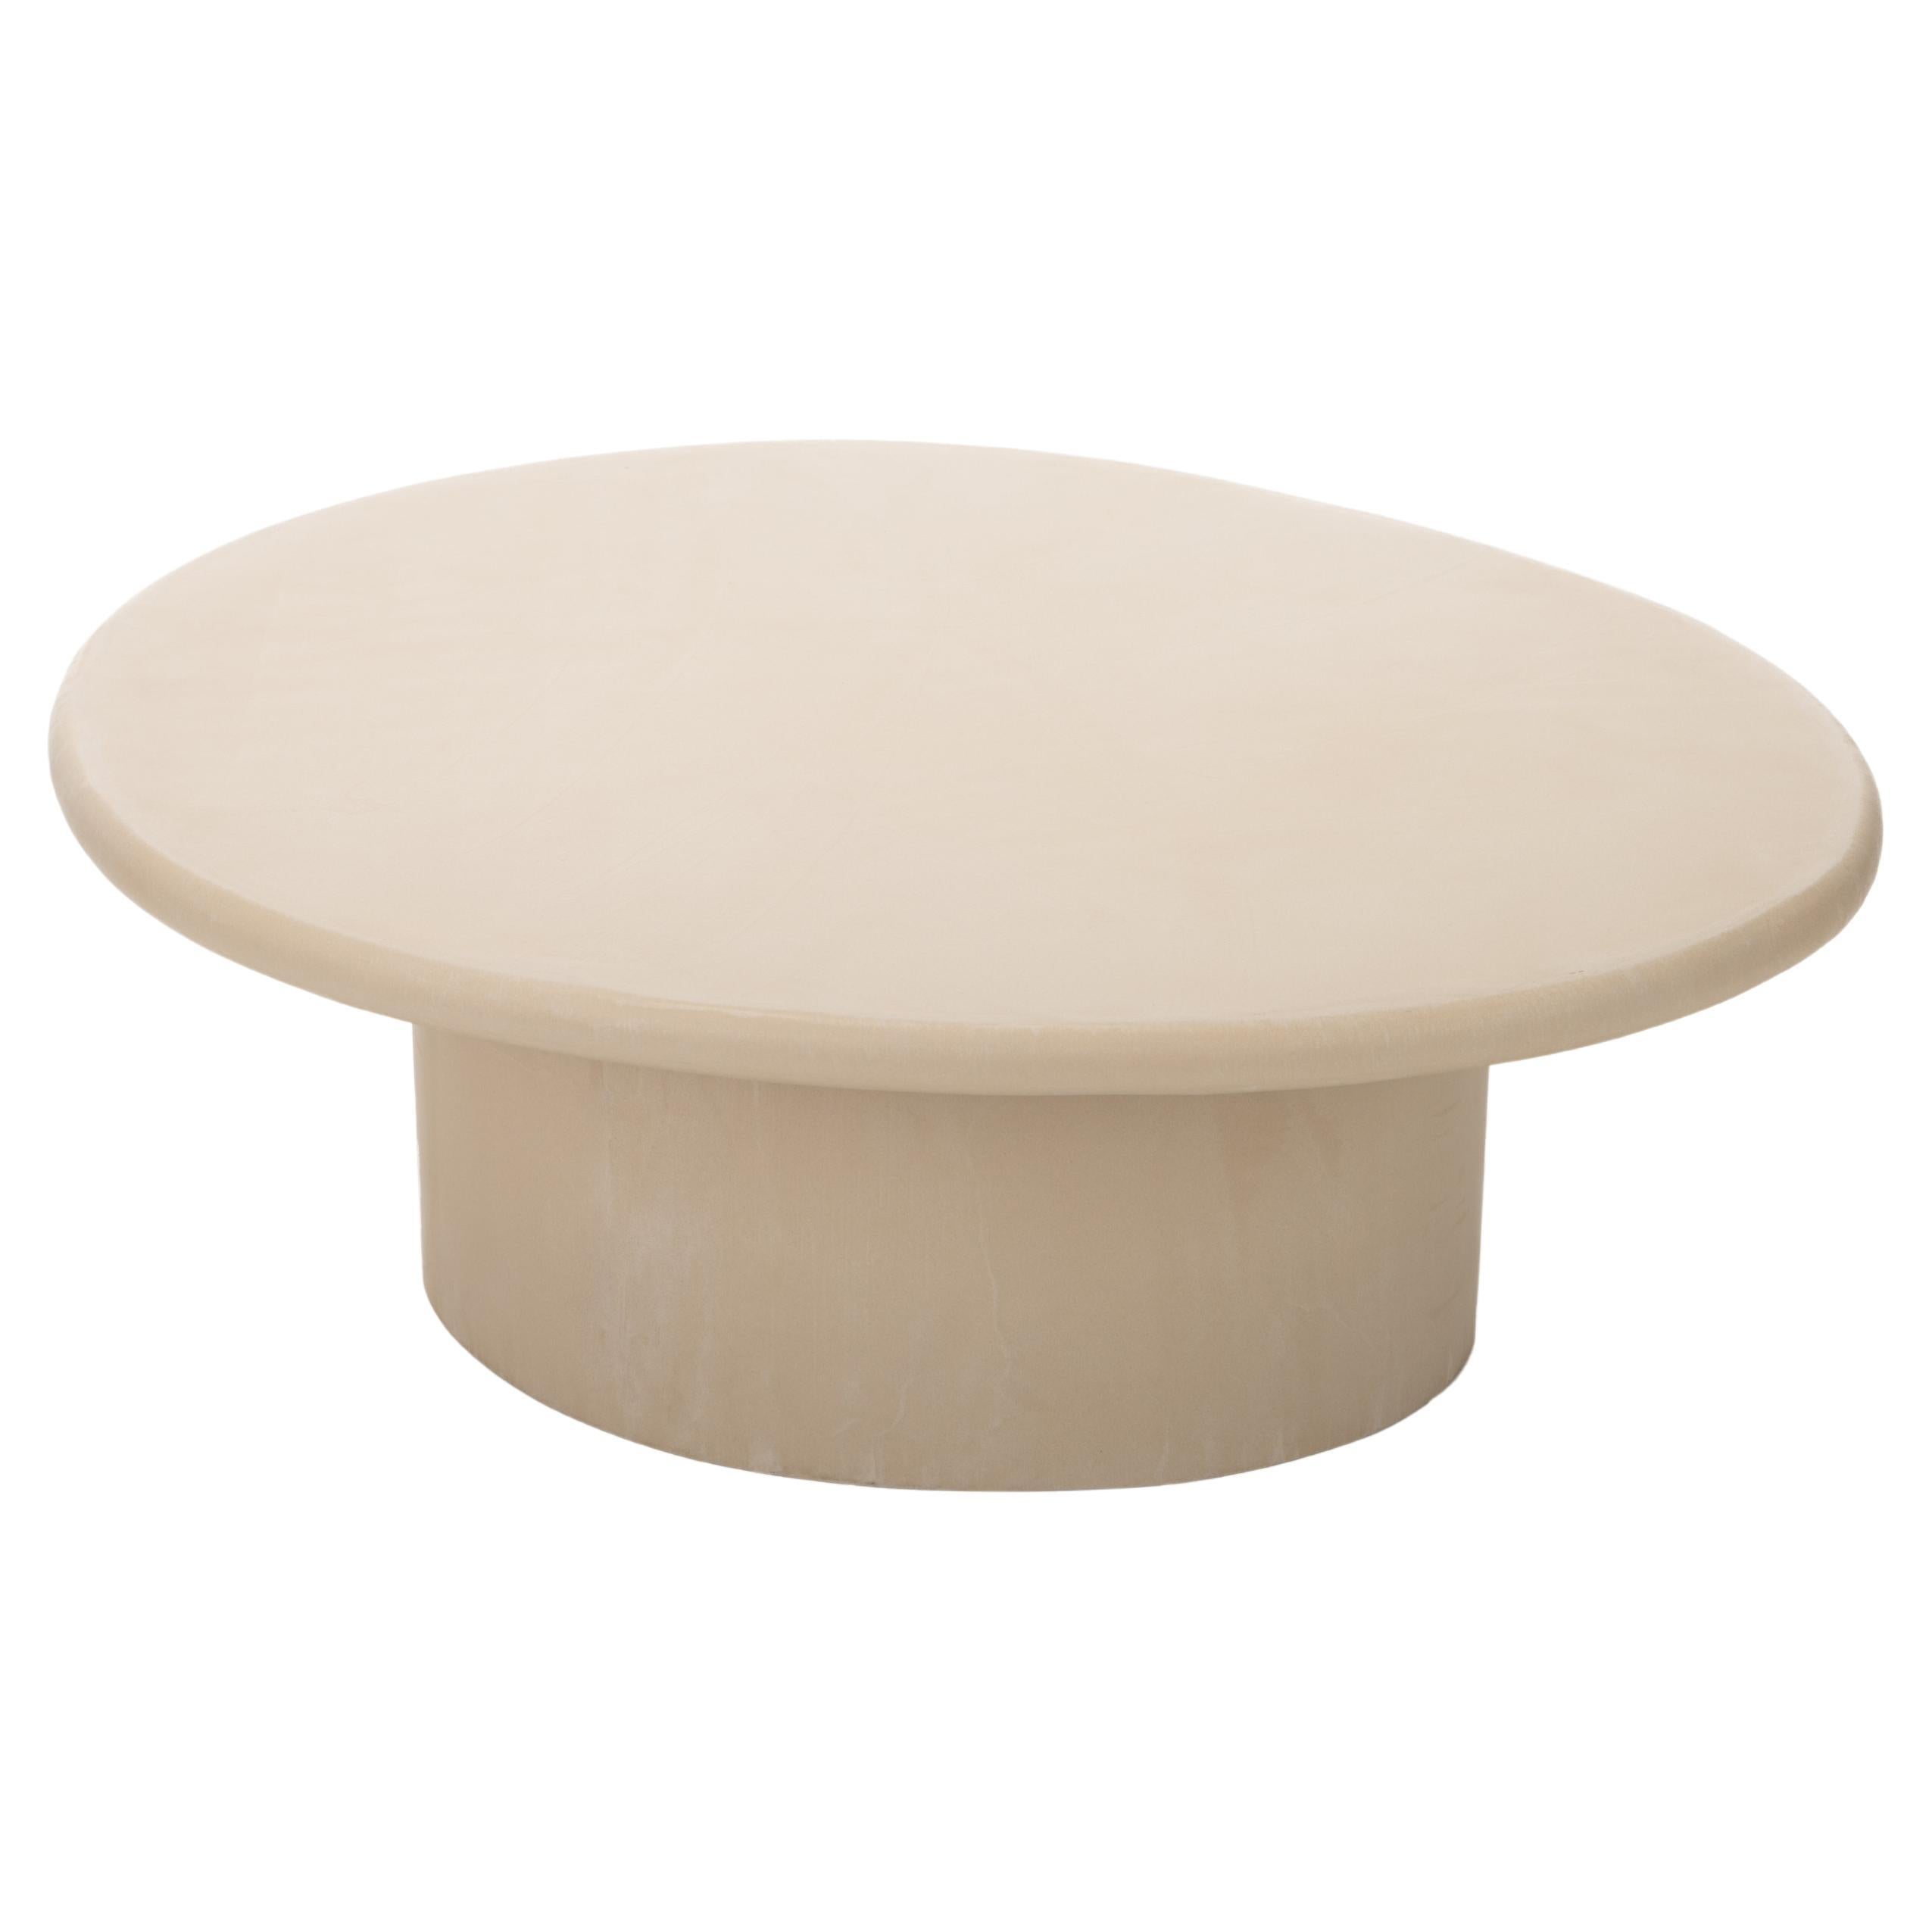 Organic Shaped Natural Plaster Coffee Table "Sami" by Isabelle Beaumont